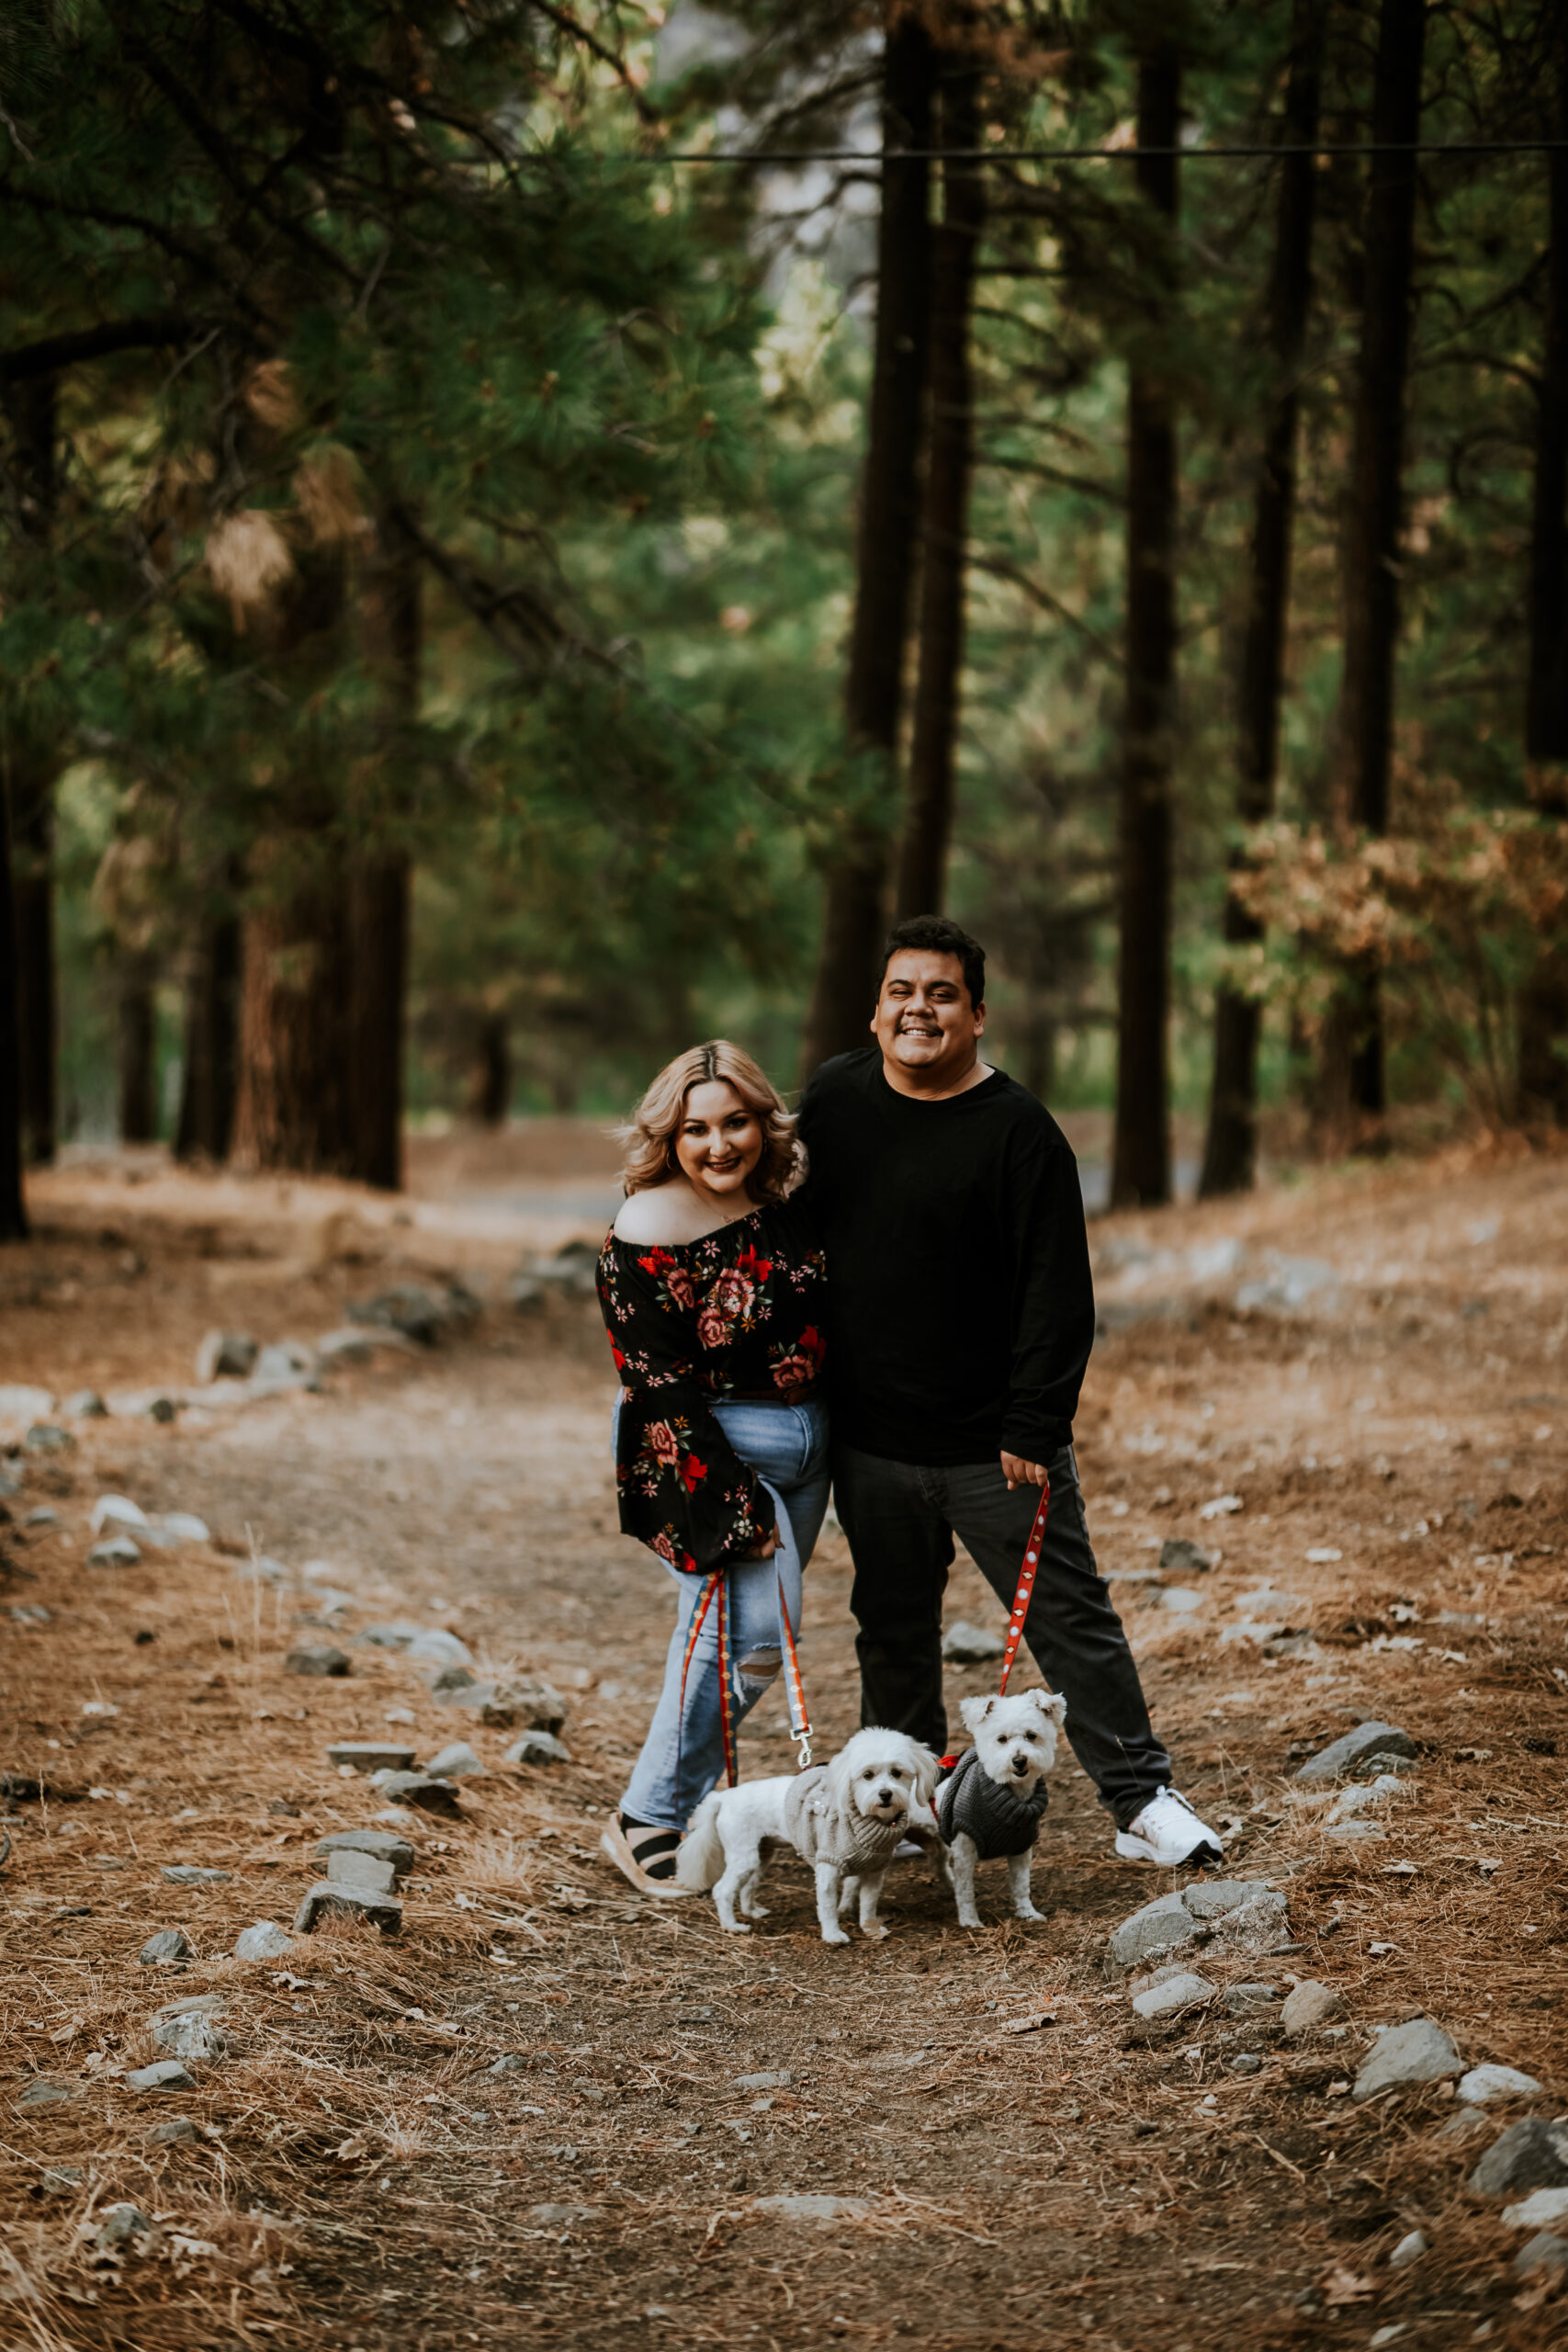 Puppy Love: Engagement Session with Dogs